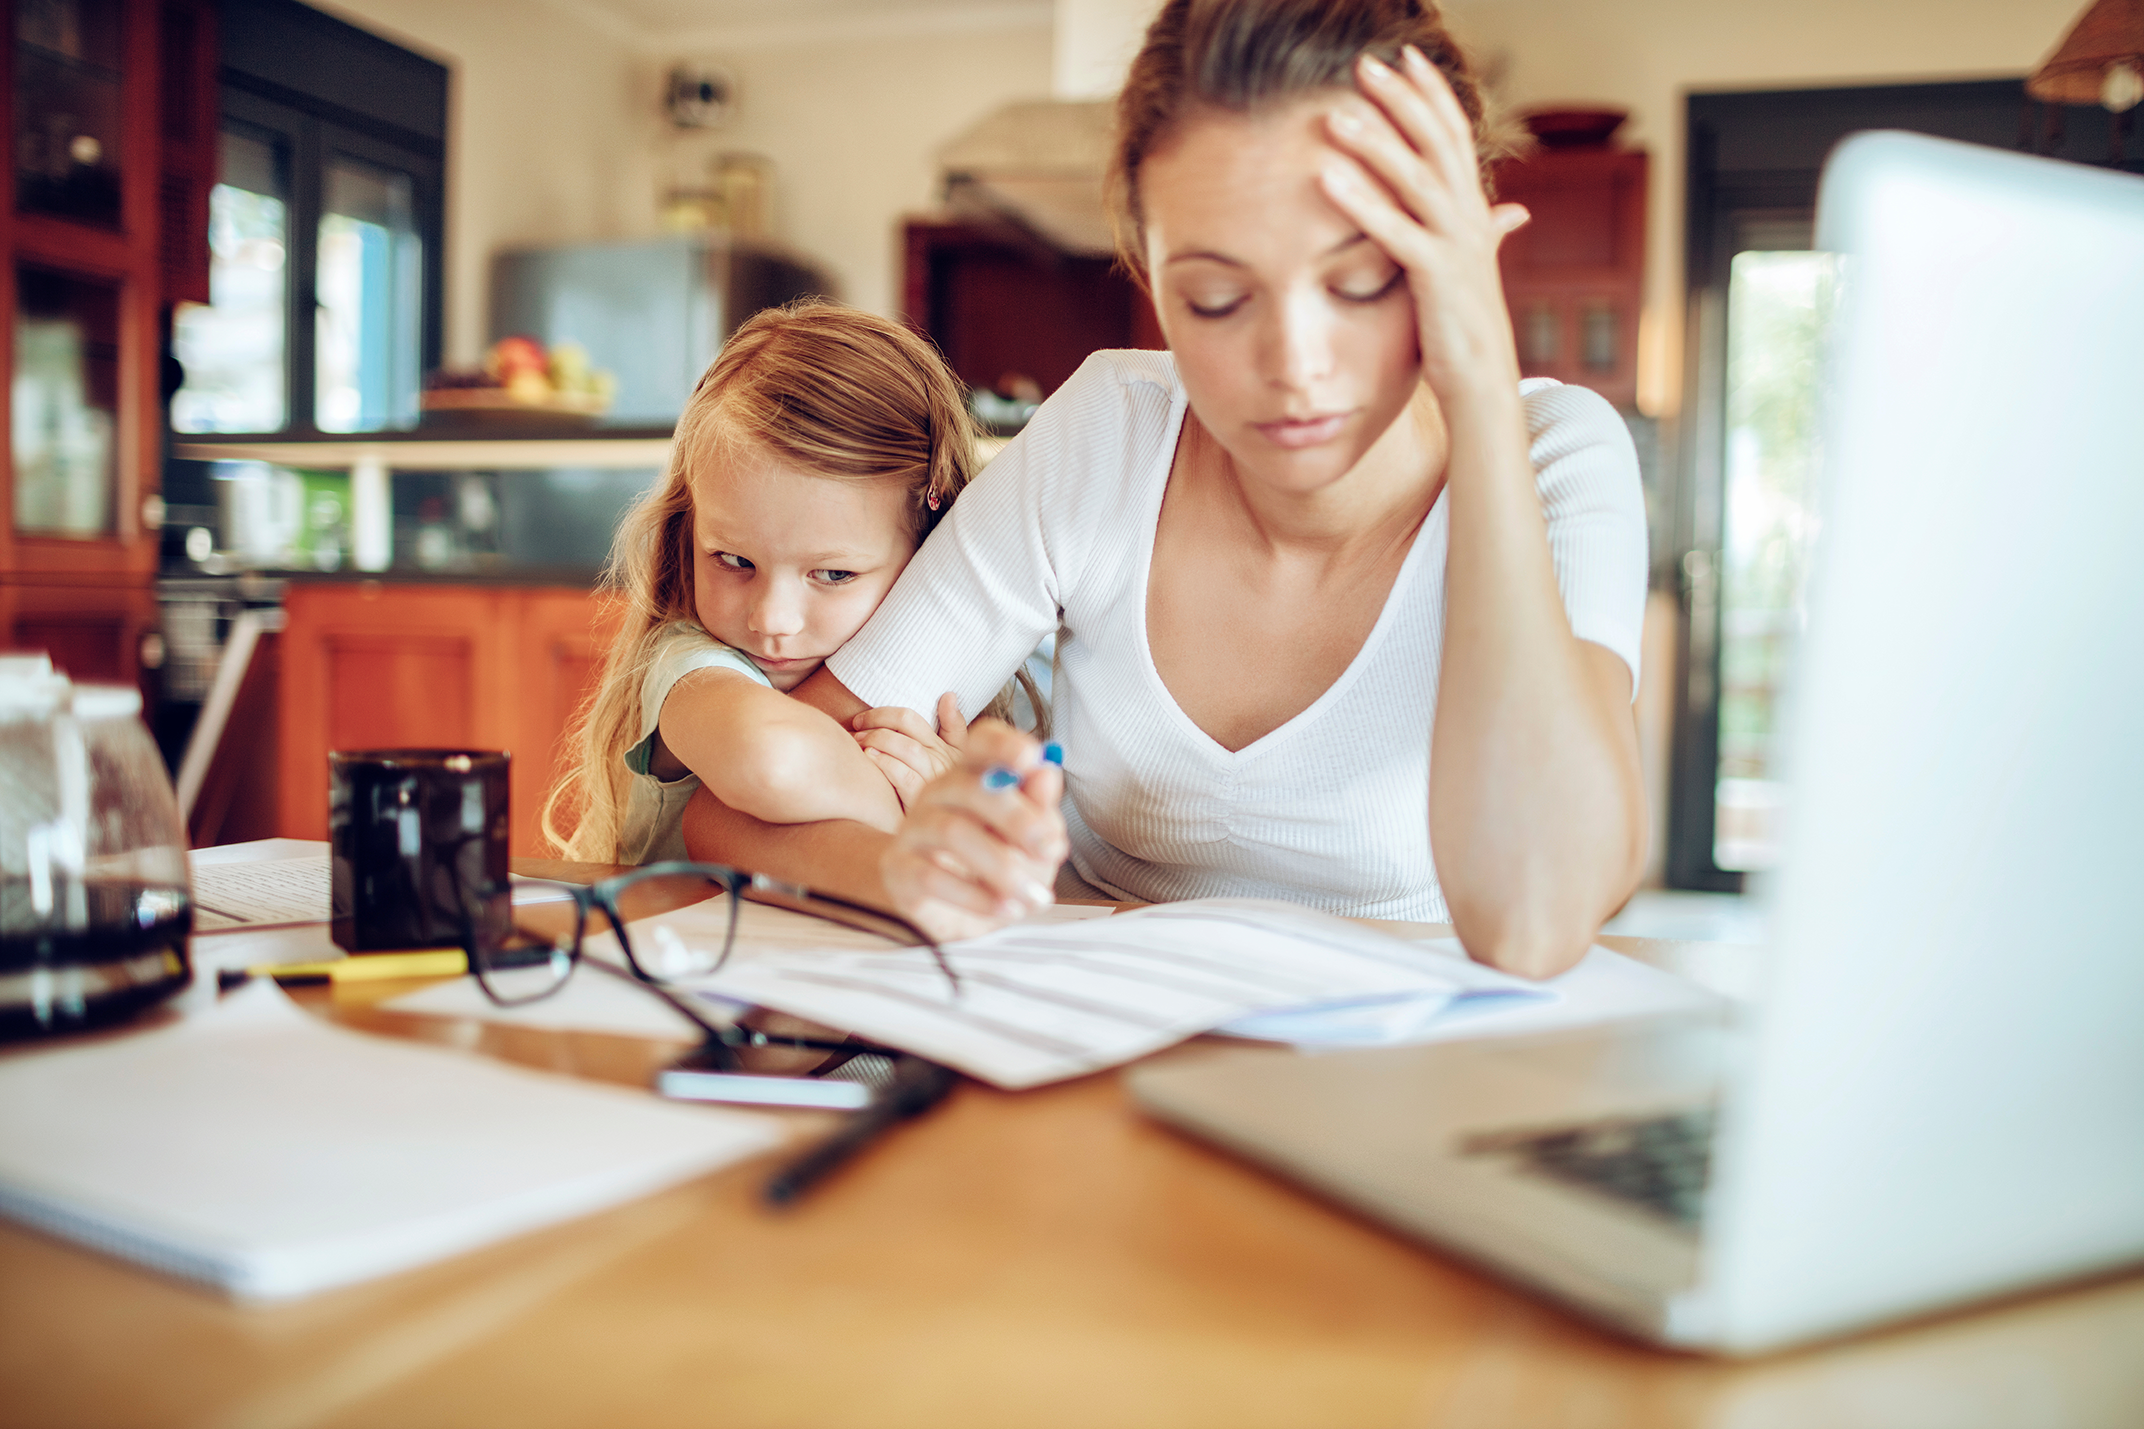 3 Tips to Achieve Balance Between Work and Family